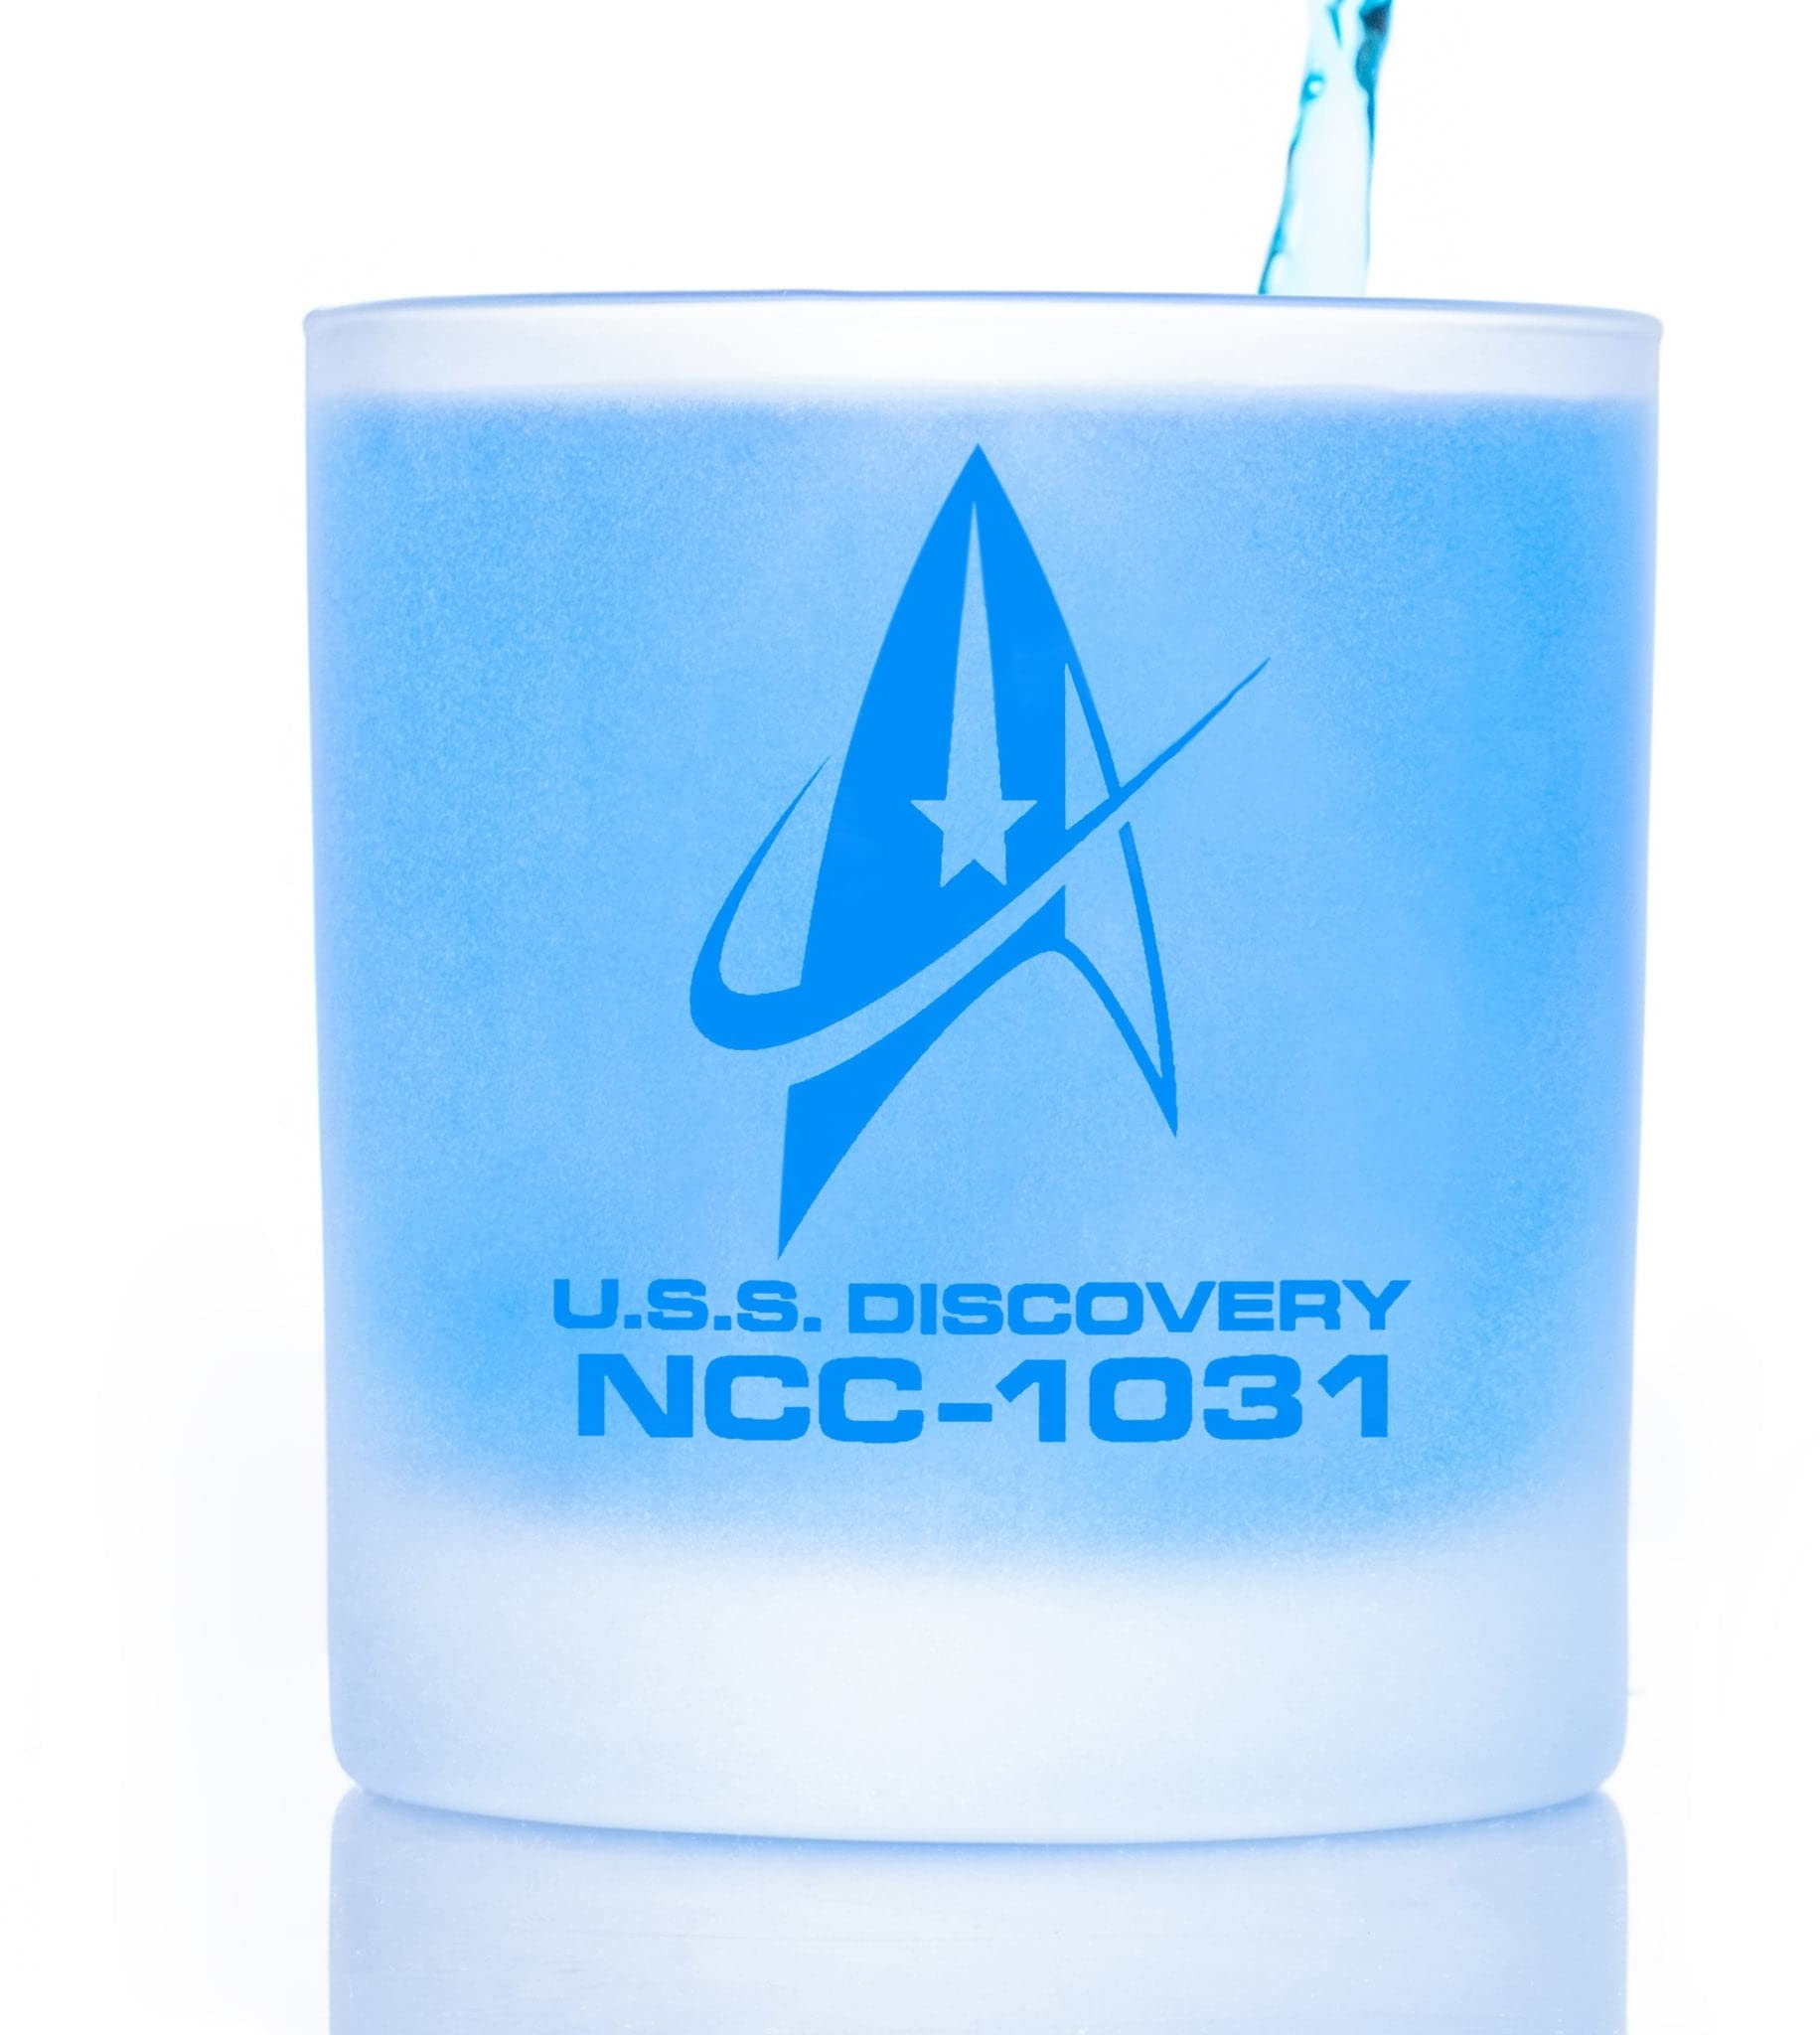 Star Trek Gifts: The Star Trek Discovery Command Badge Whiskey Glass | The Next Generation | Star Trek Beyond and more | Thinkgeek